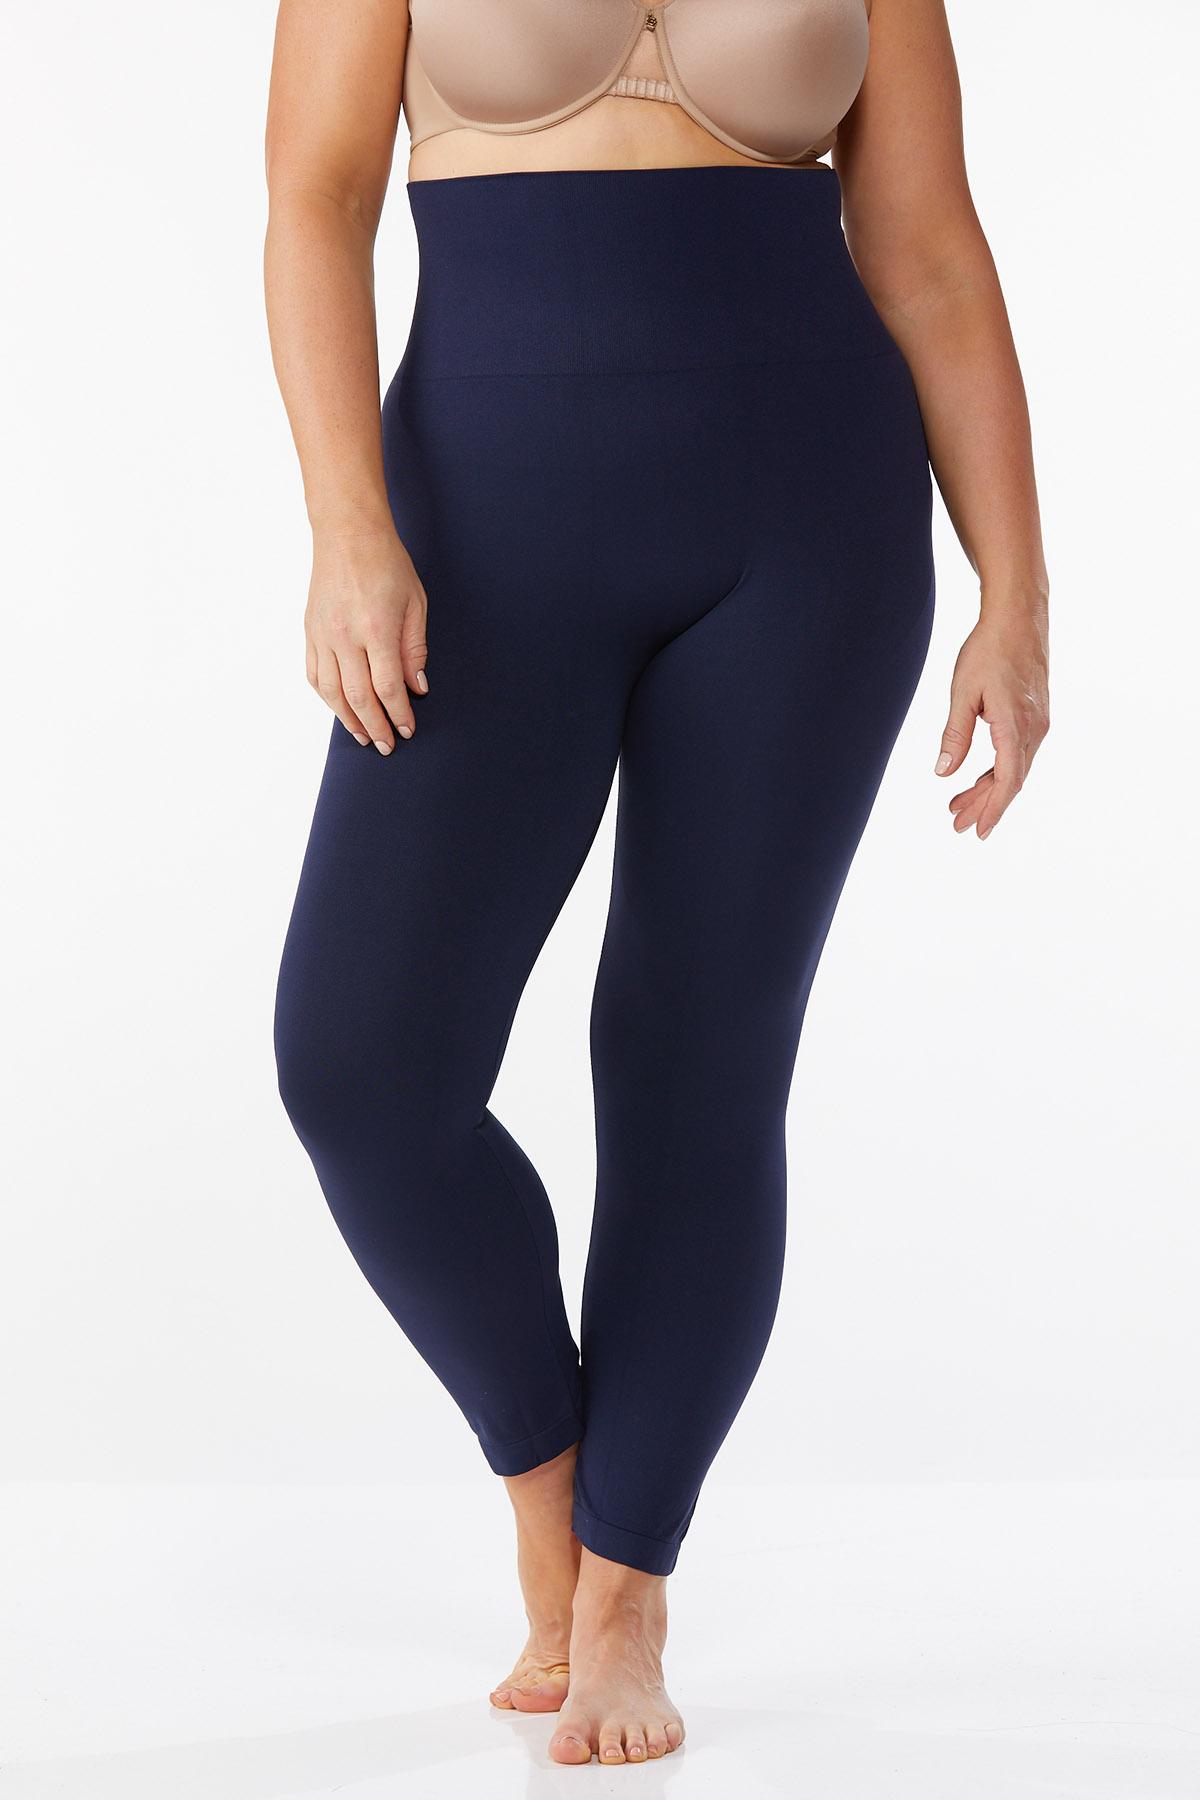 Plus Size The Perfect Navy Leggings